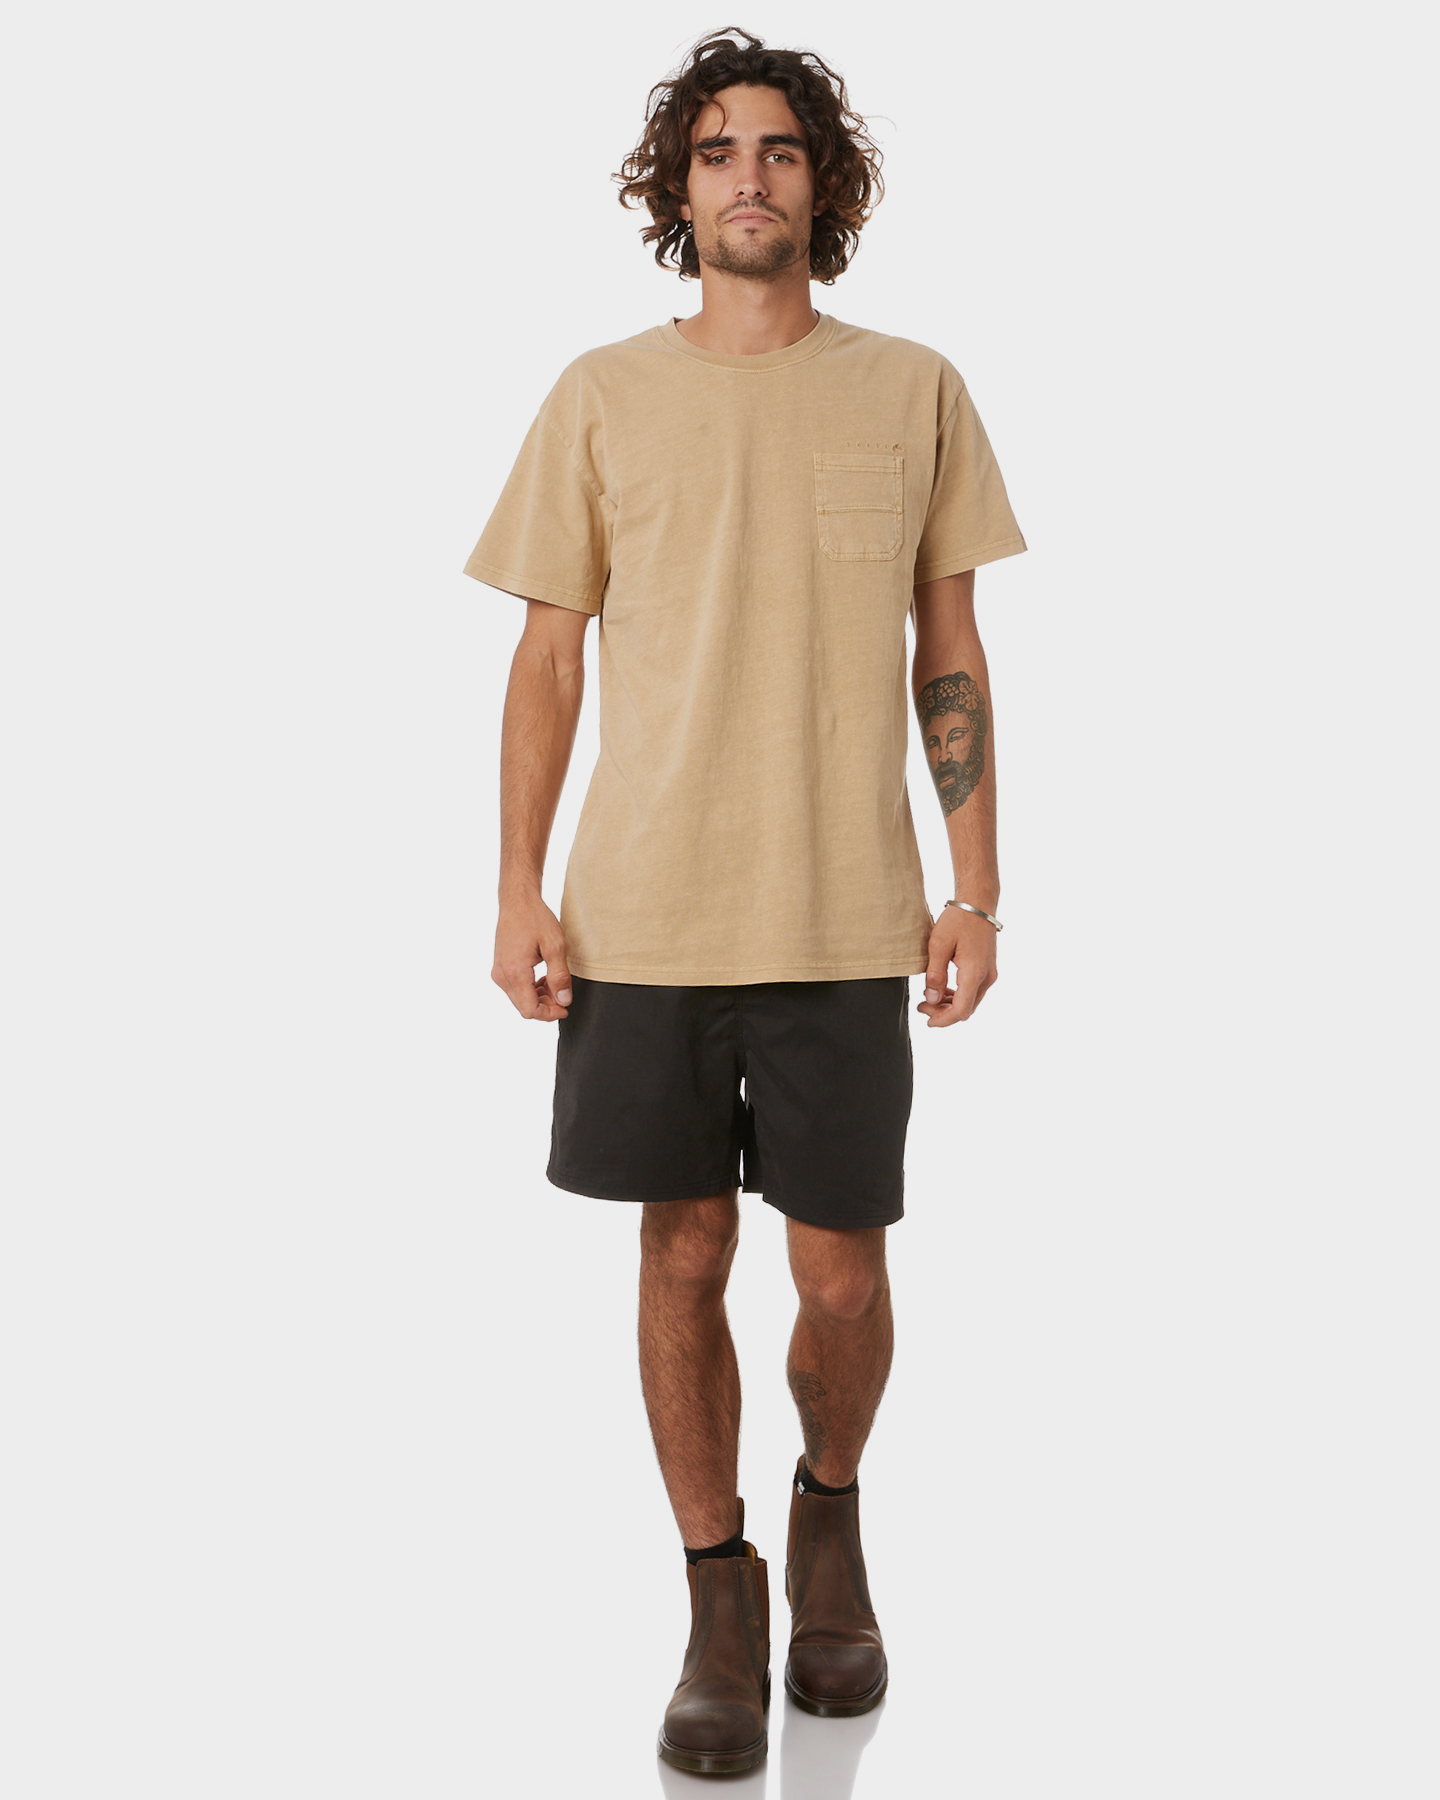 Rusty Mens Daily Grind 18In Worker Short - Black | SurfStitch